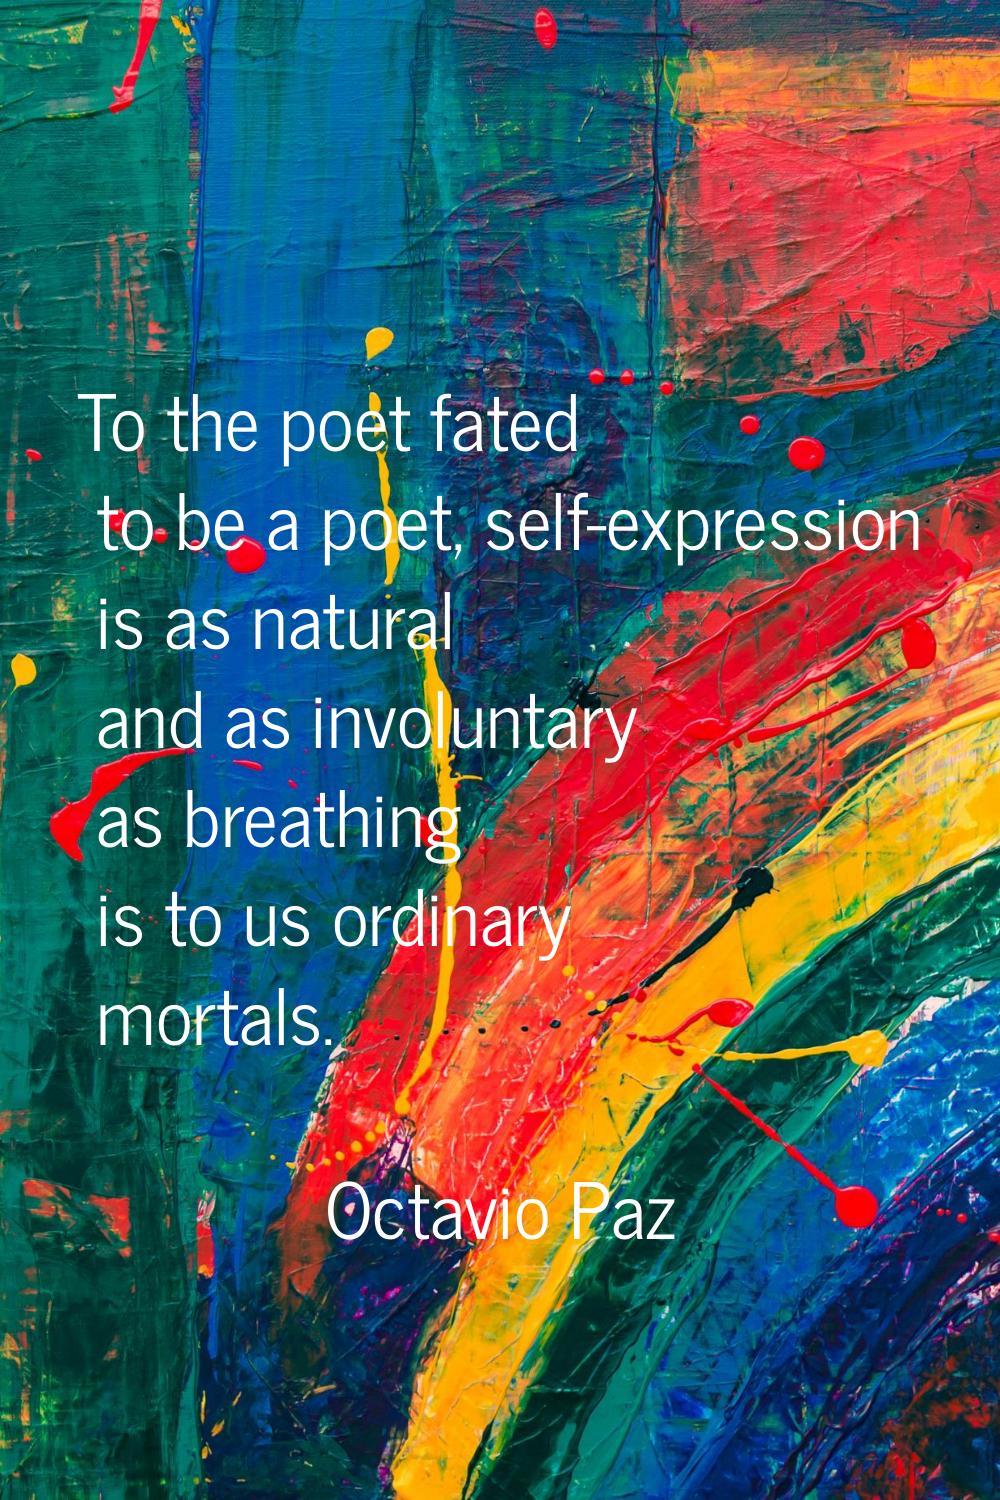 To the poet fated to be a poet, self-expression is as natural and as involuntary as breathing is to